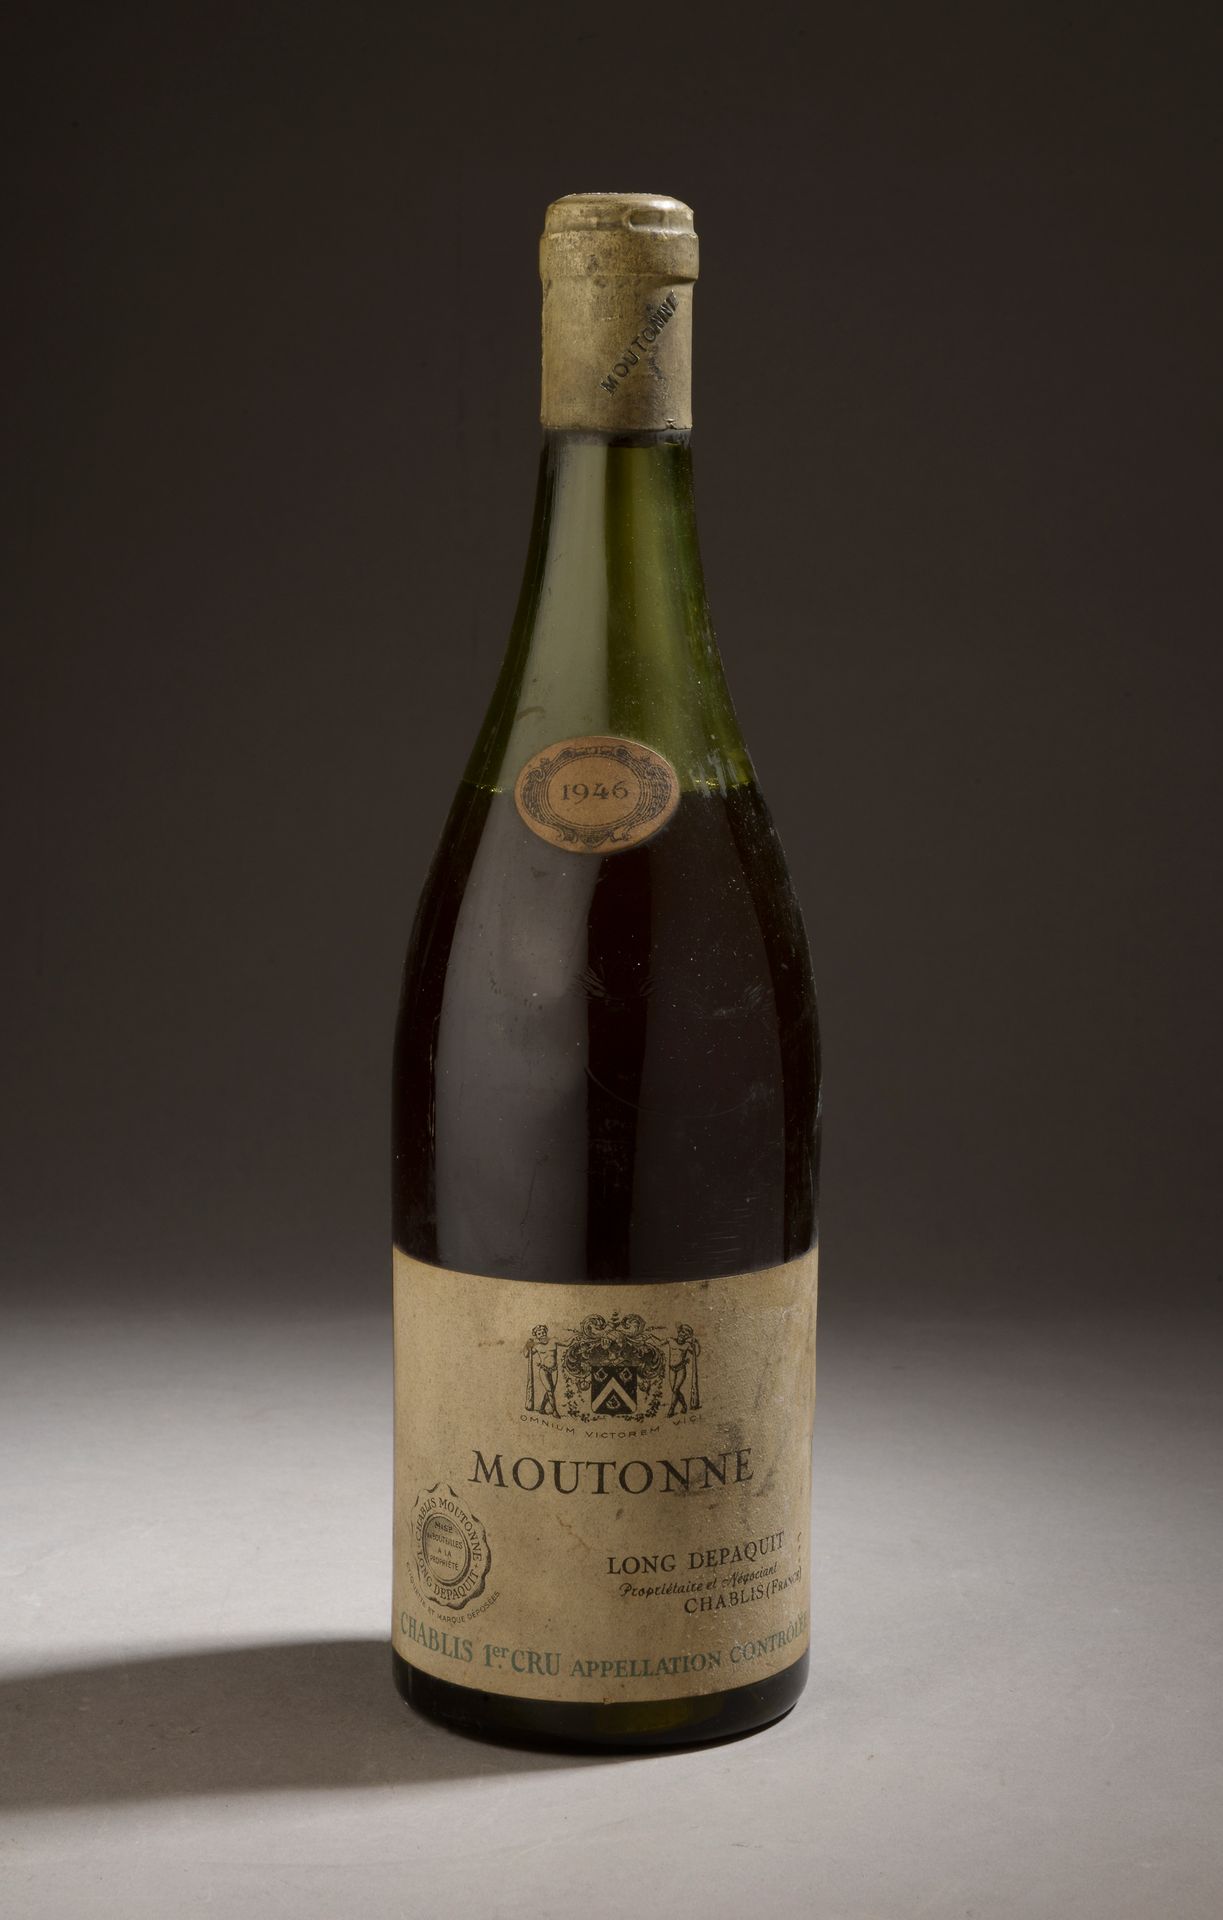 Null 1 bottle CHABLIS "Moutonne 1er cru", Long Depaquit 1946 (and, stained cap, &hellip;